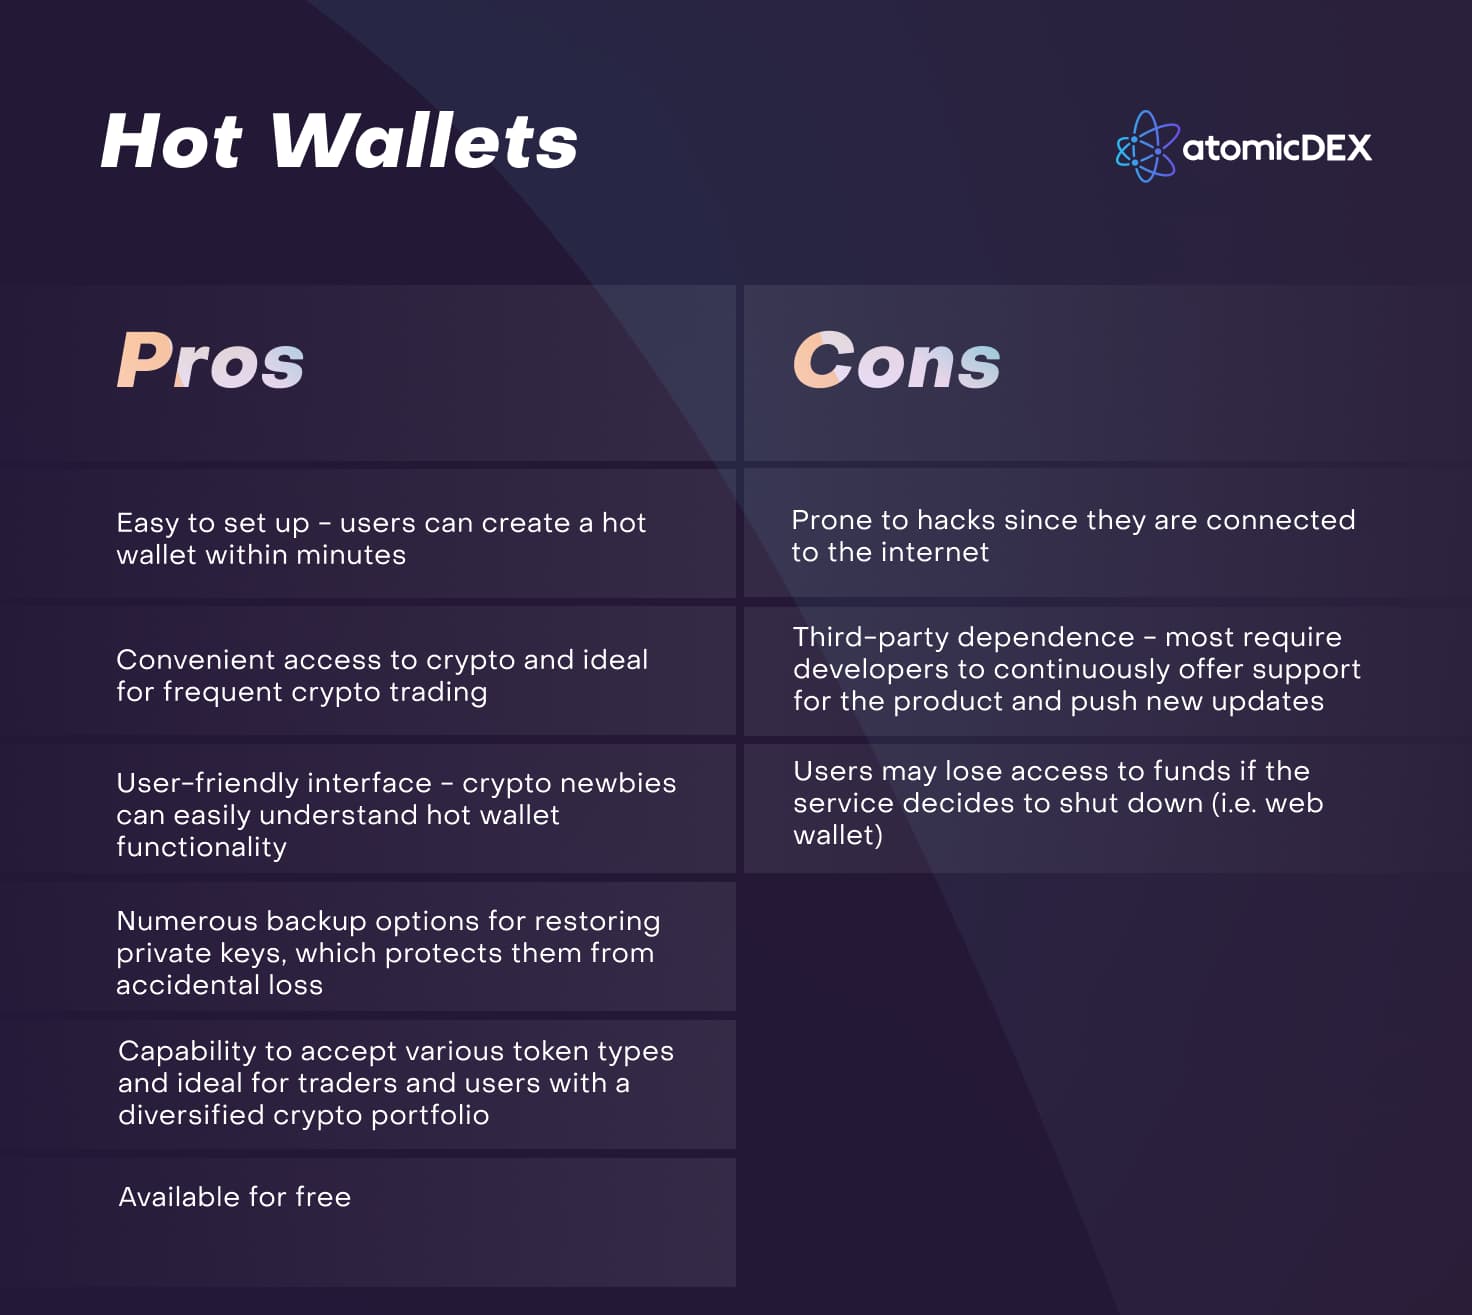 Pros and Cons of Hot Wallets